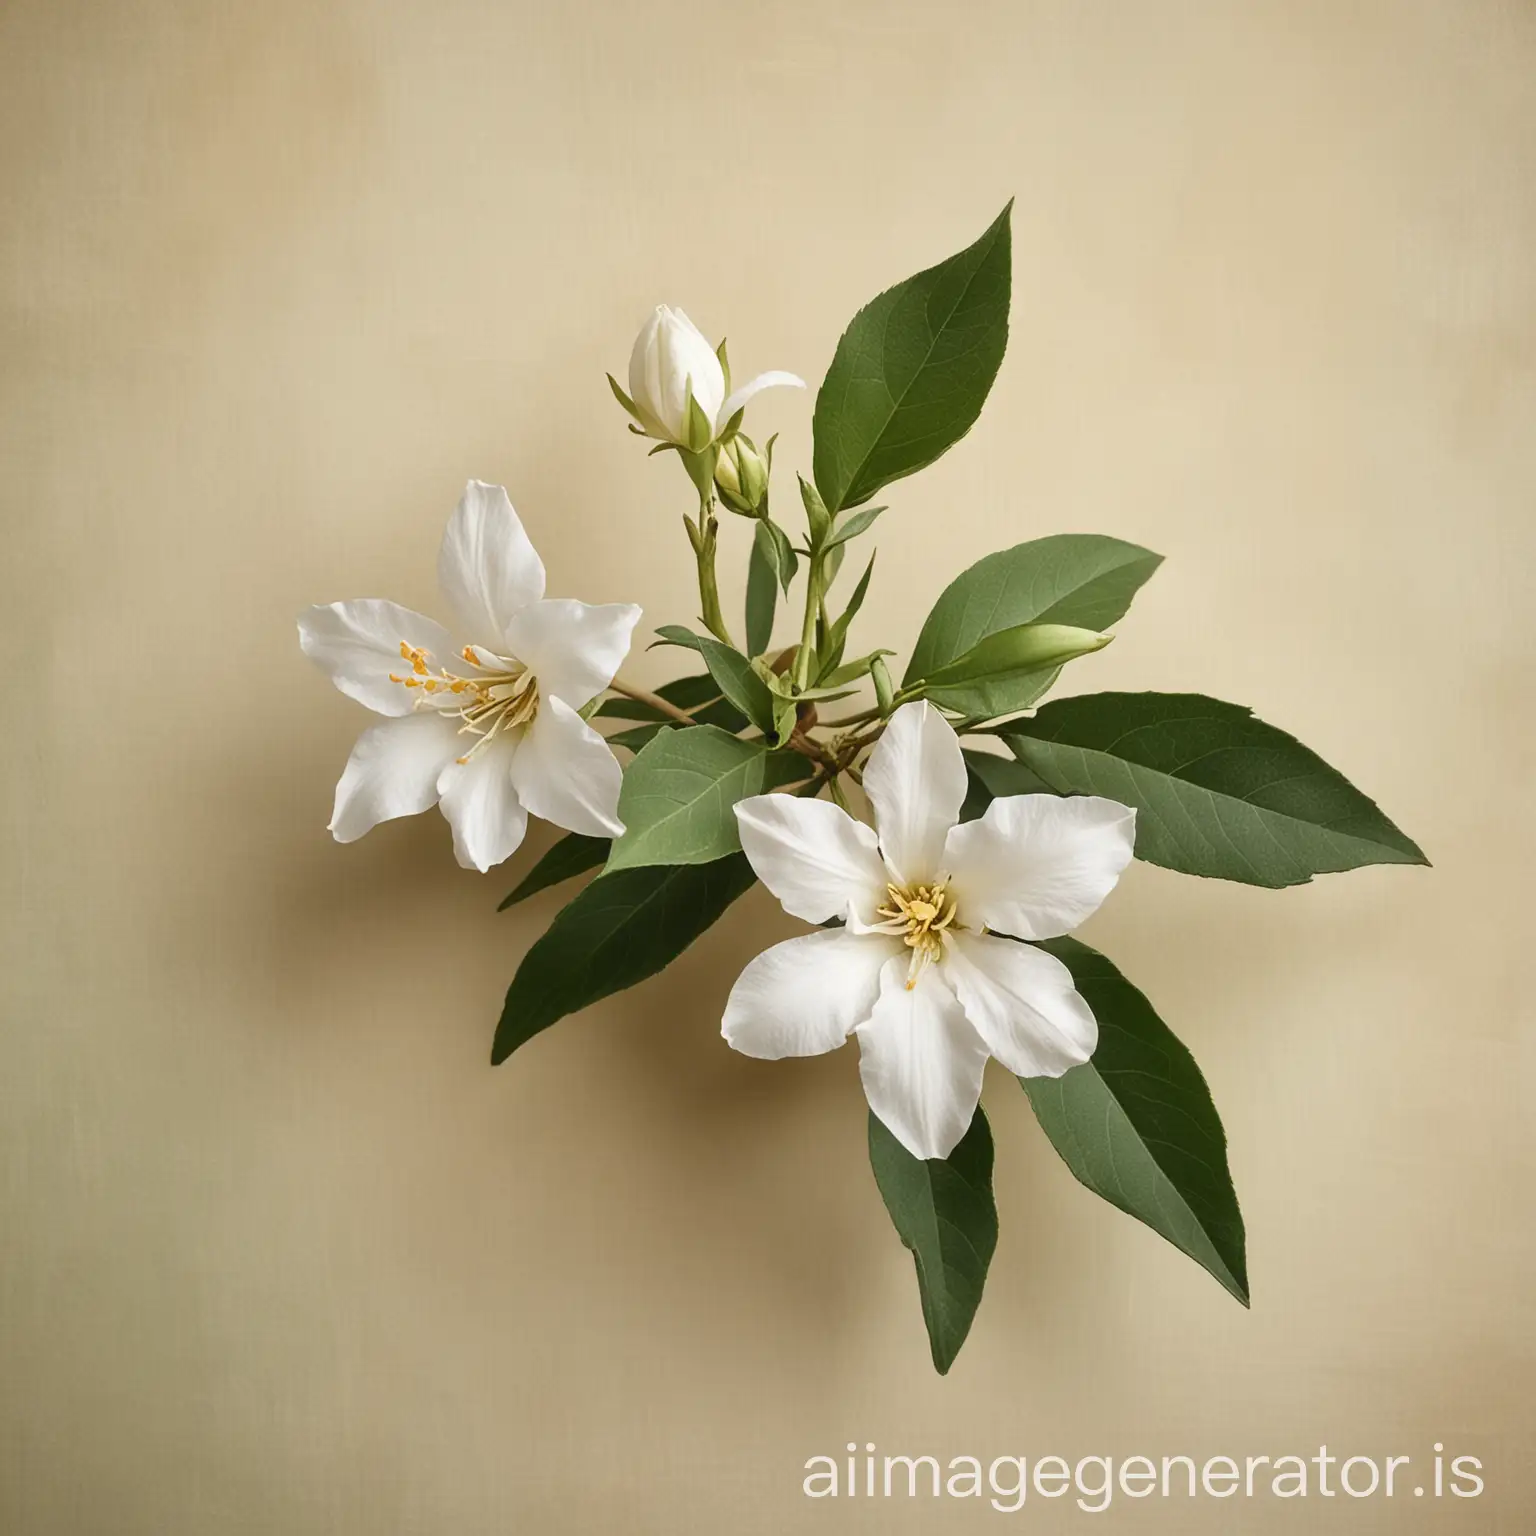 Delicate-Jasmine-Flower-Blossoming-Against-Tropical-Beige-and-Sage-Background